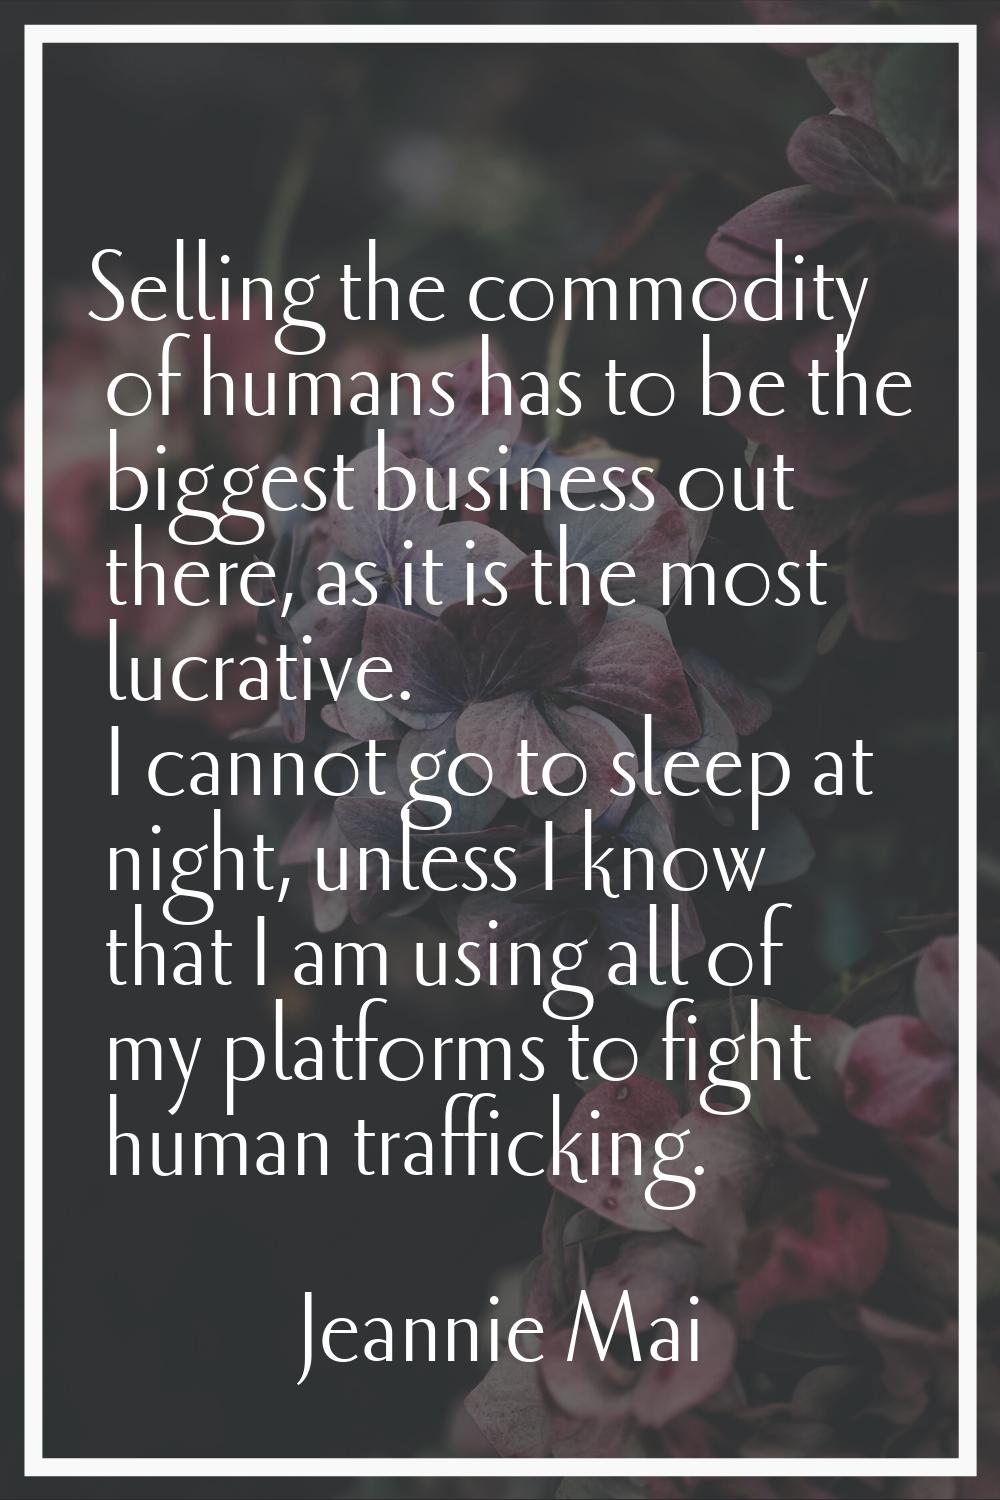 Selling the commodity of humans has to be the biggest business out there, as it is the most lucrati